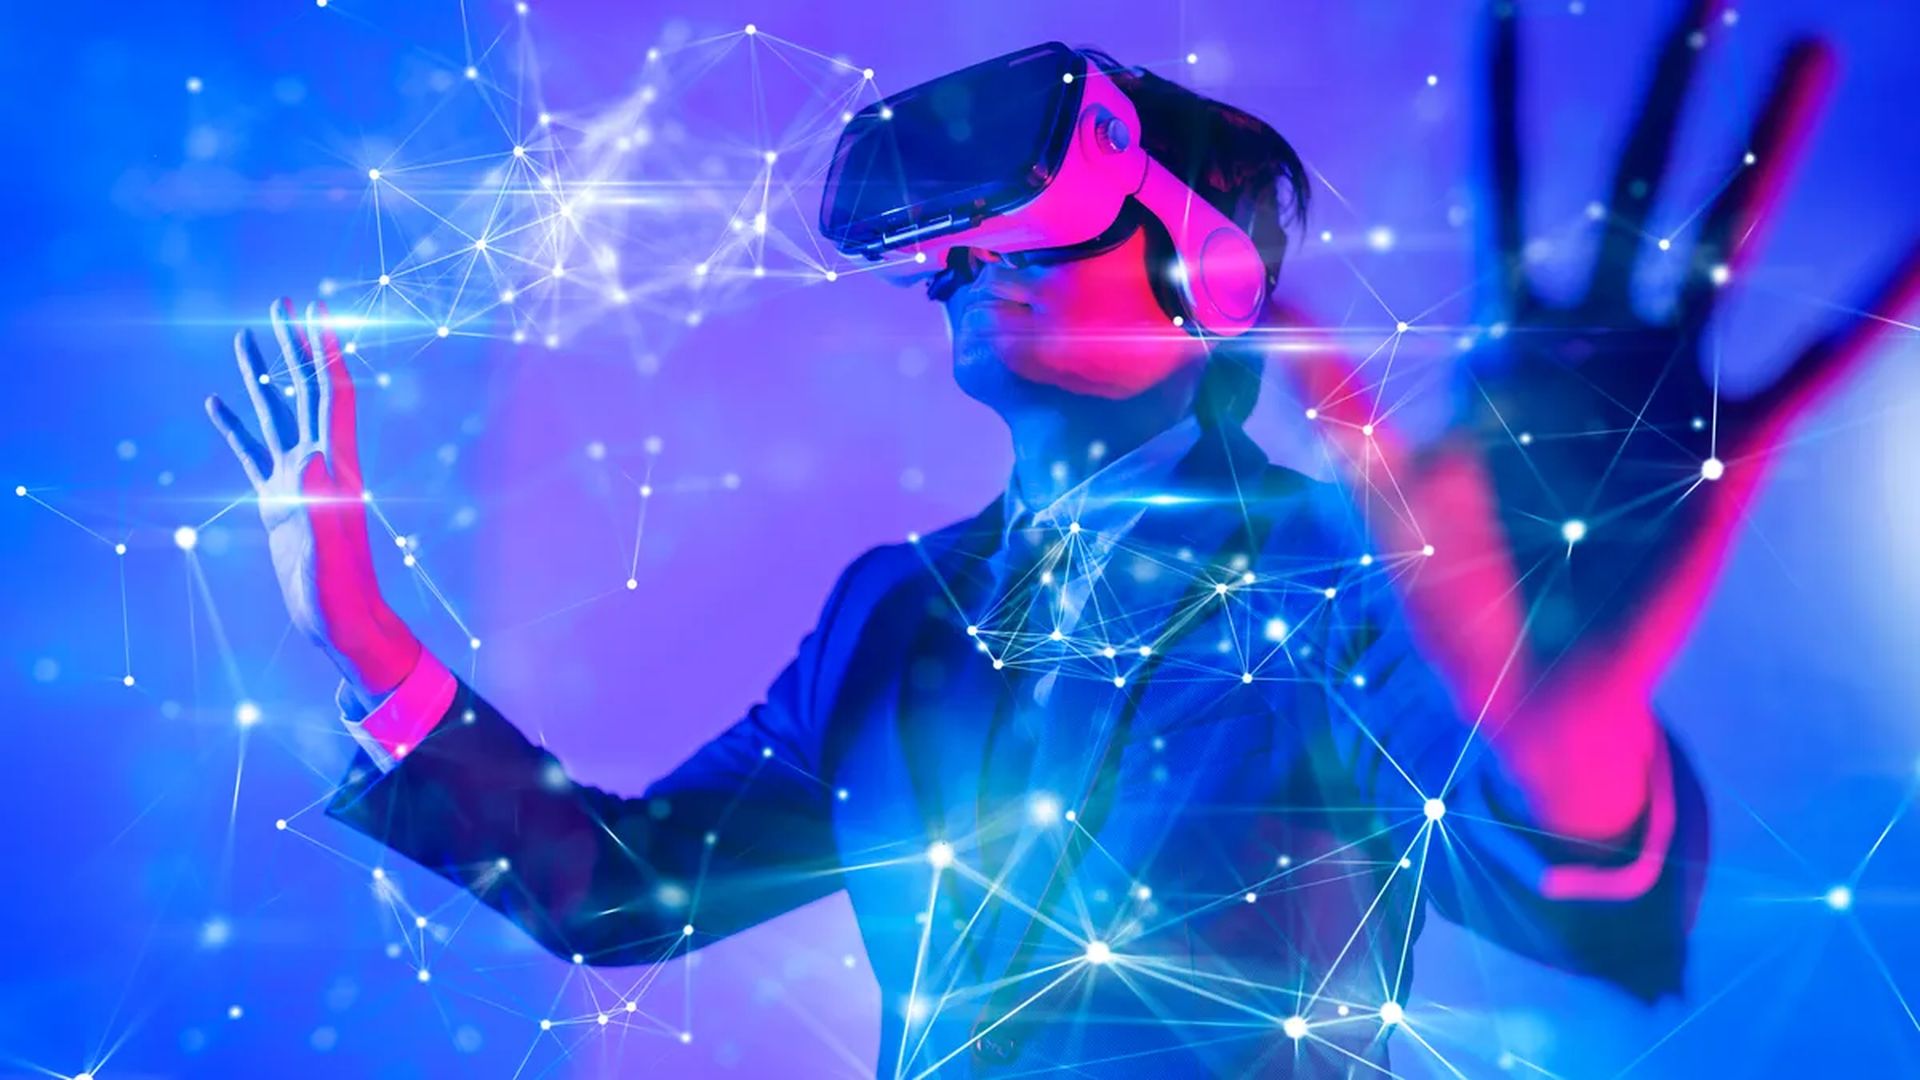 The Mall of the Metaverse has been officially launched, according to Majid Al Futtaim. On the eve of the World Government Summit, the announcement was made....